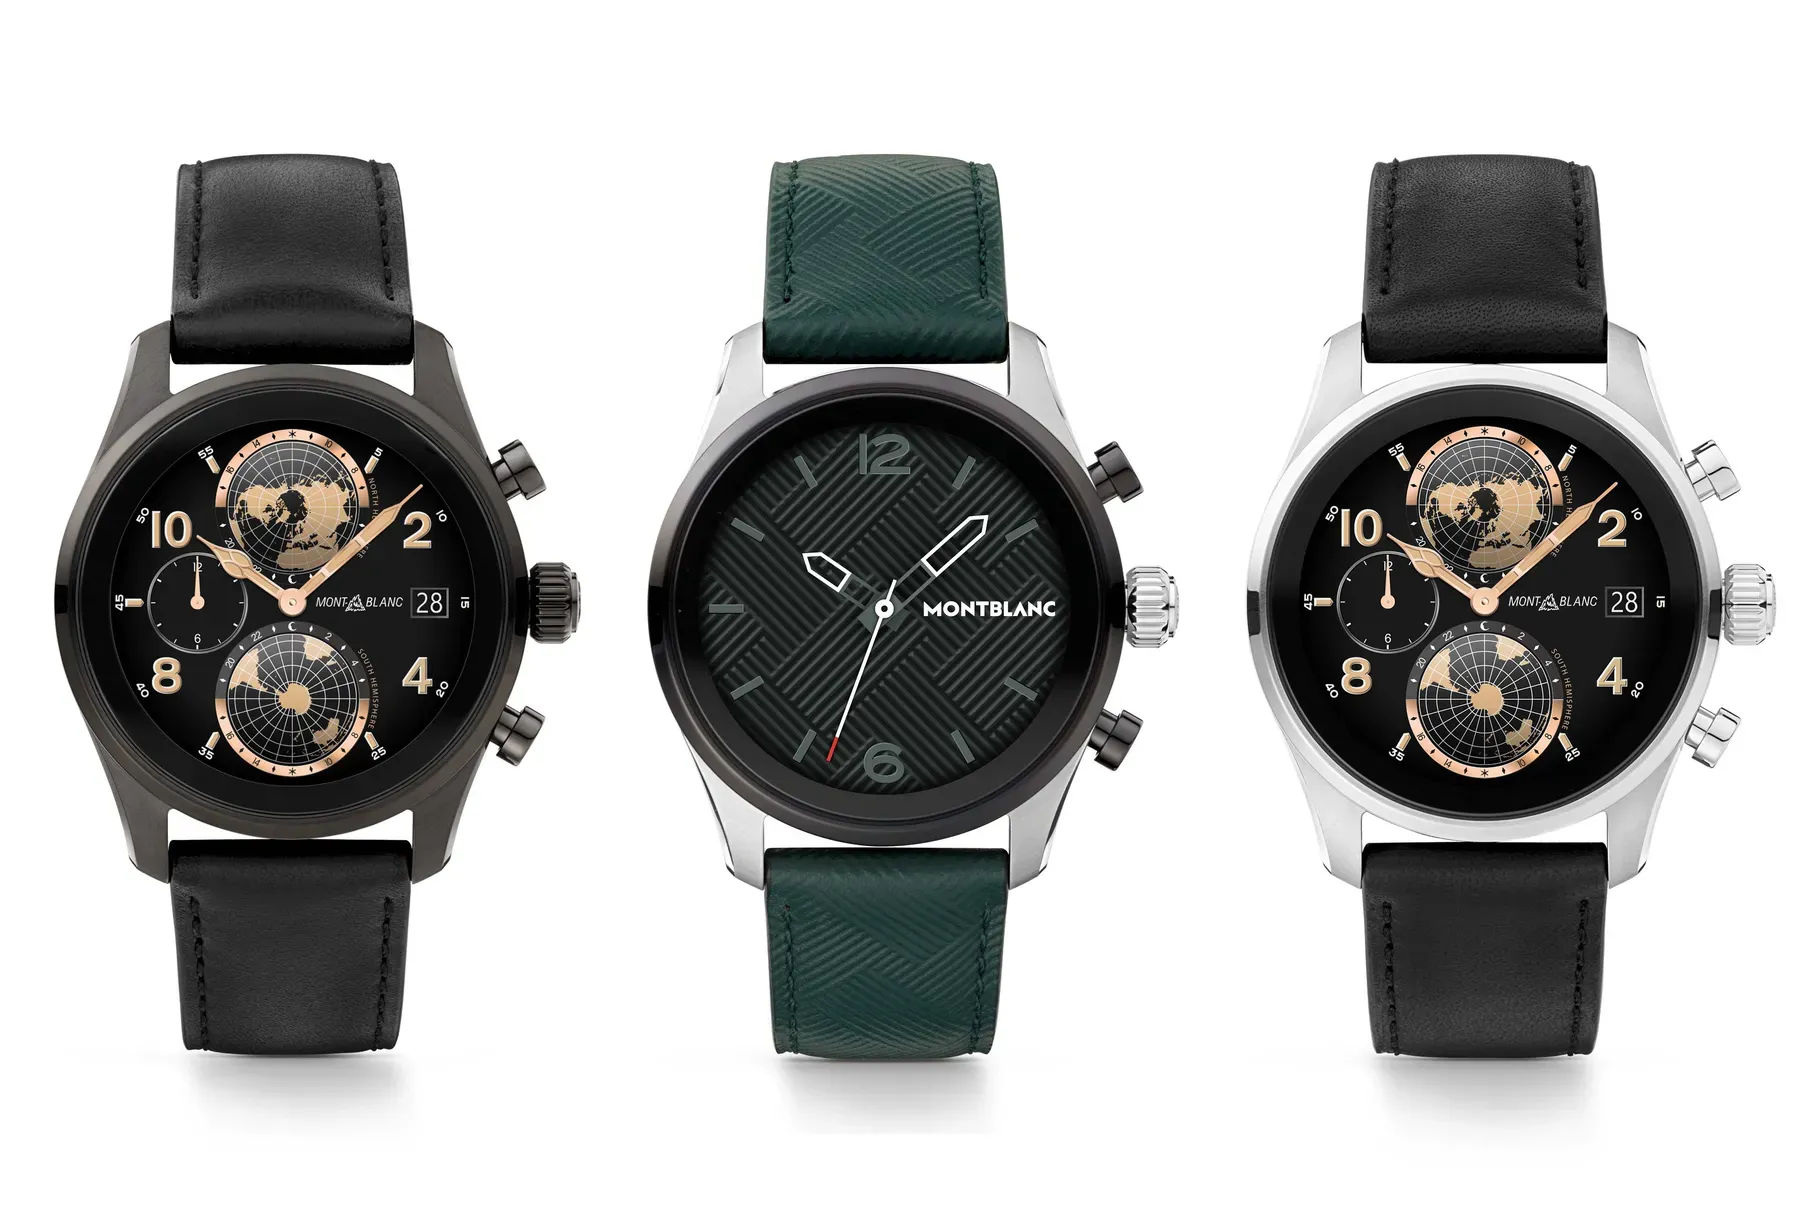 Montblanc Summit 3 smartwatch in three different colors